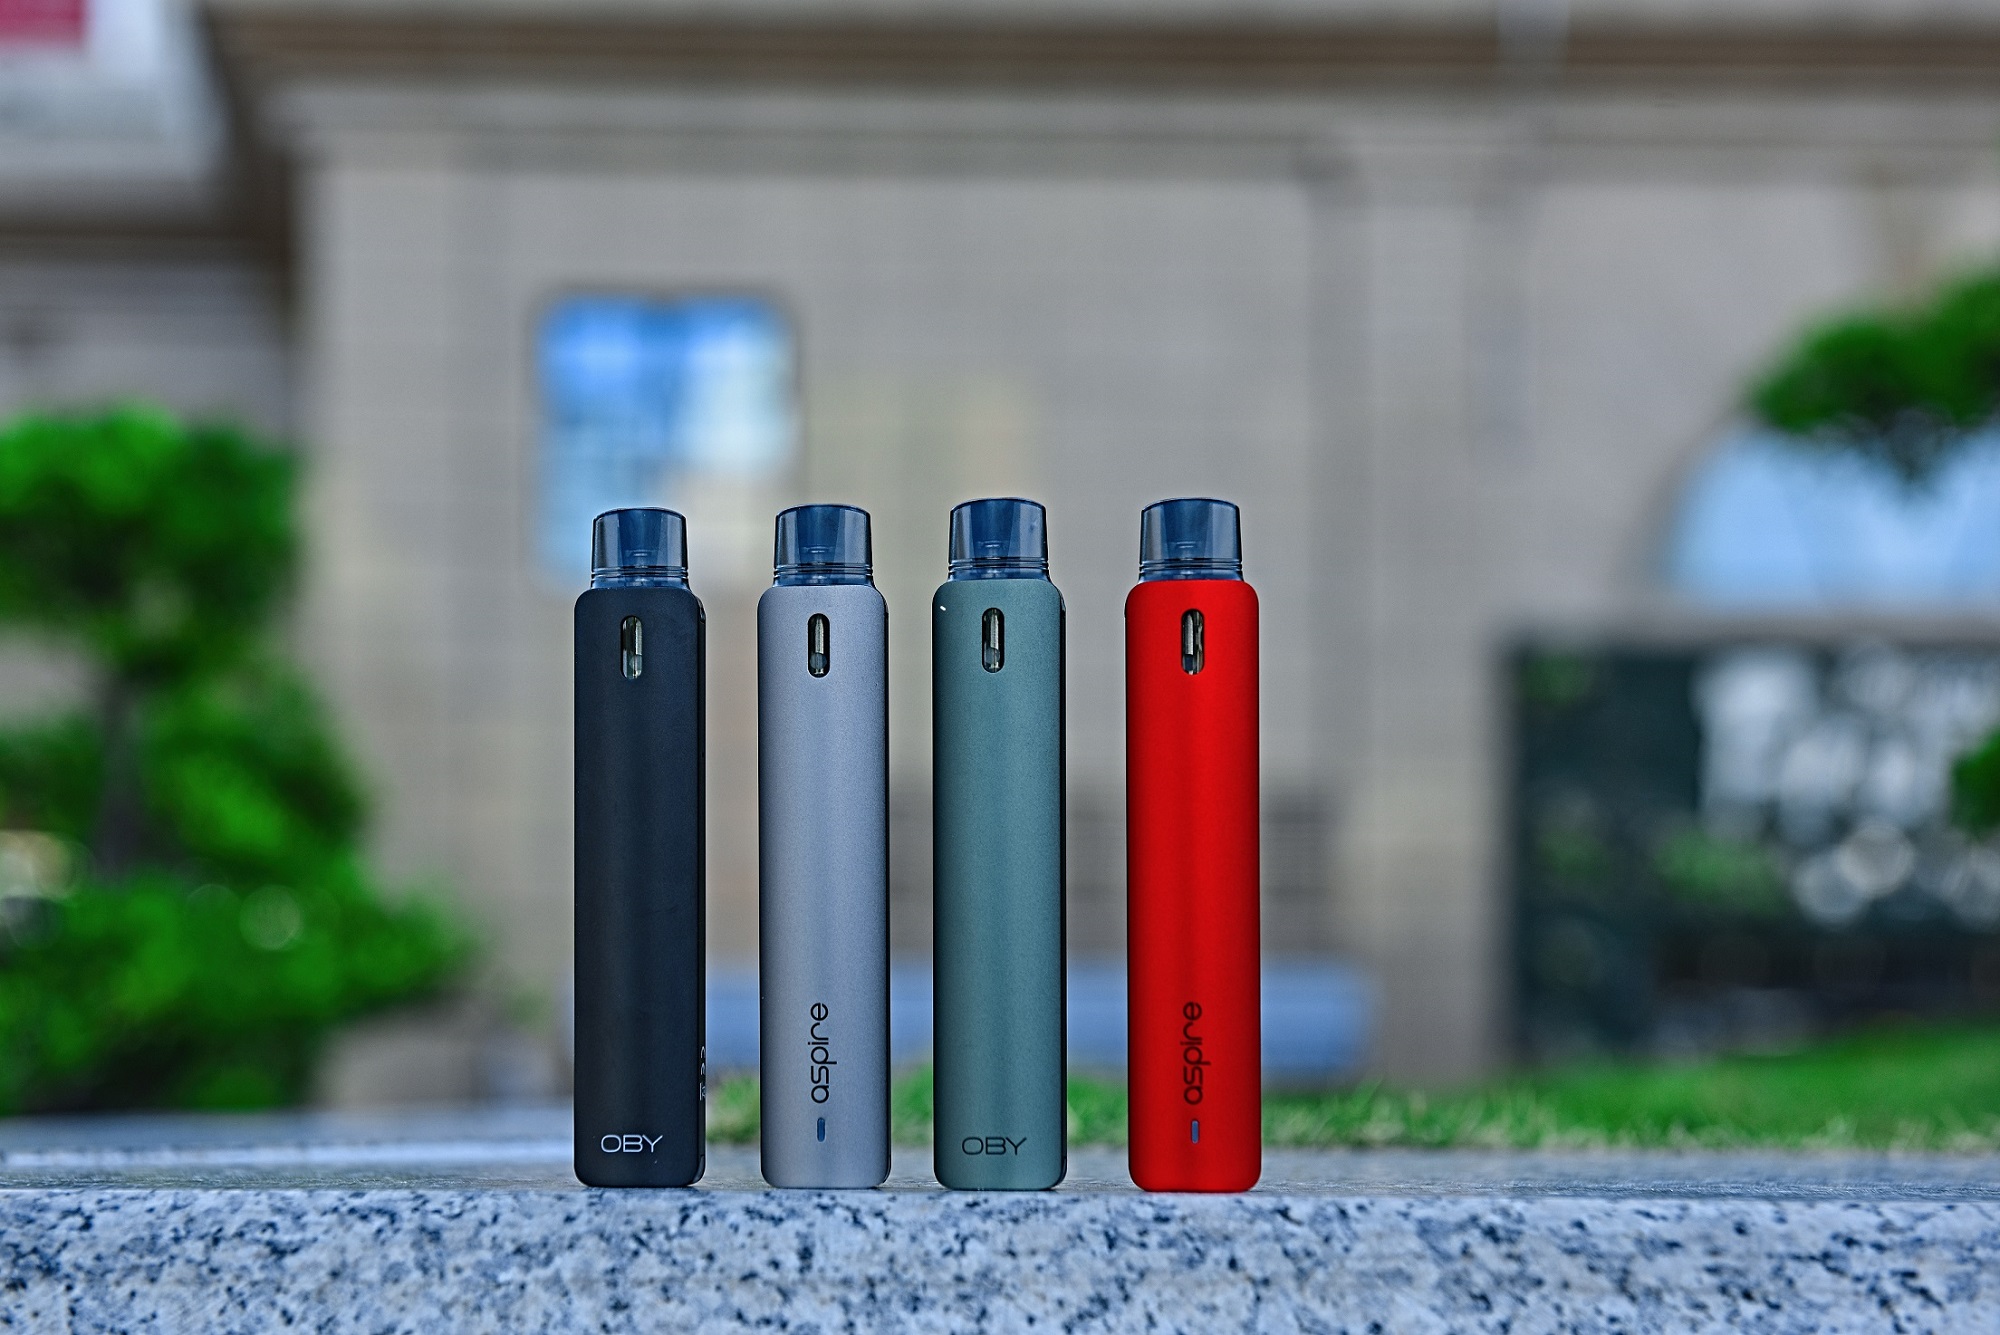 New Aspire OBY stick style with refillable pods.